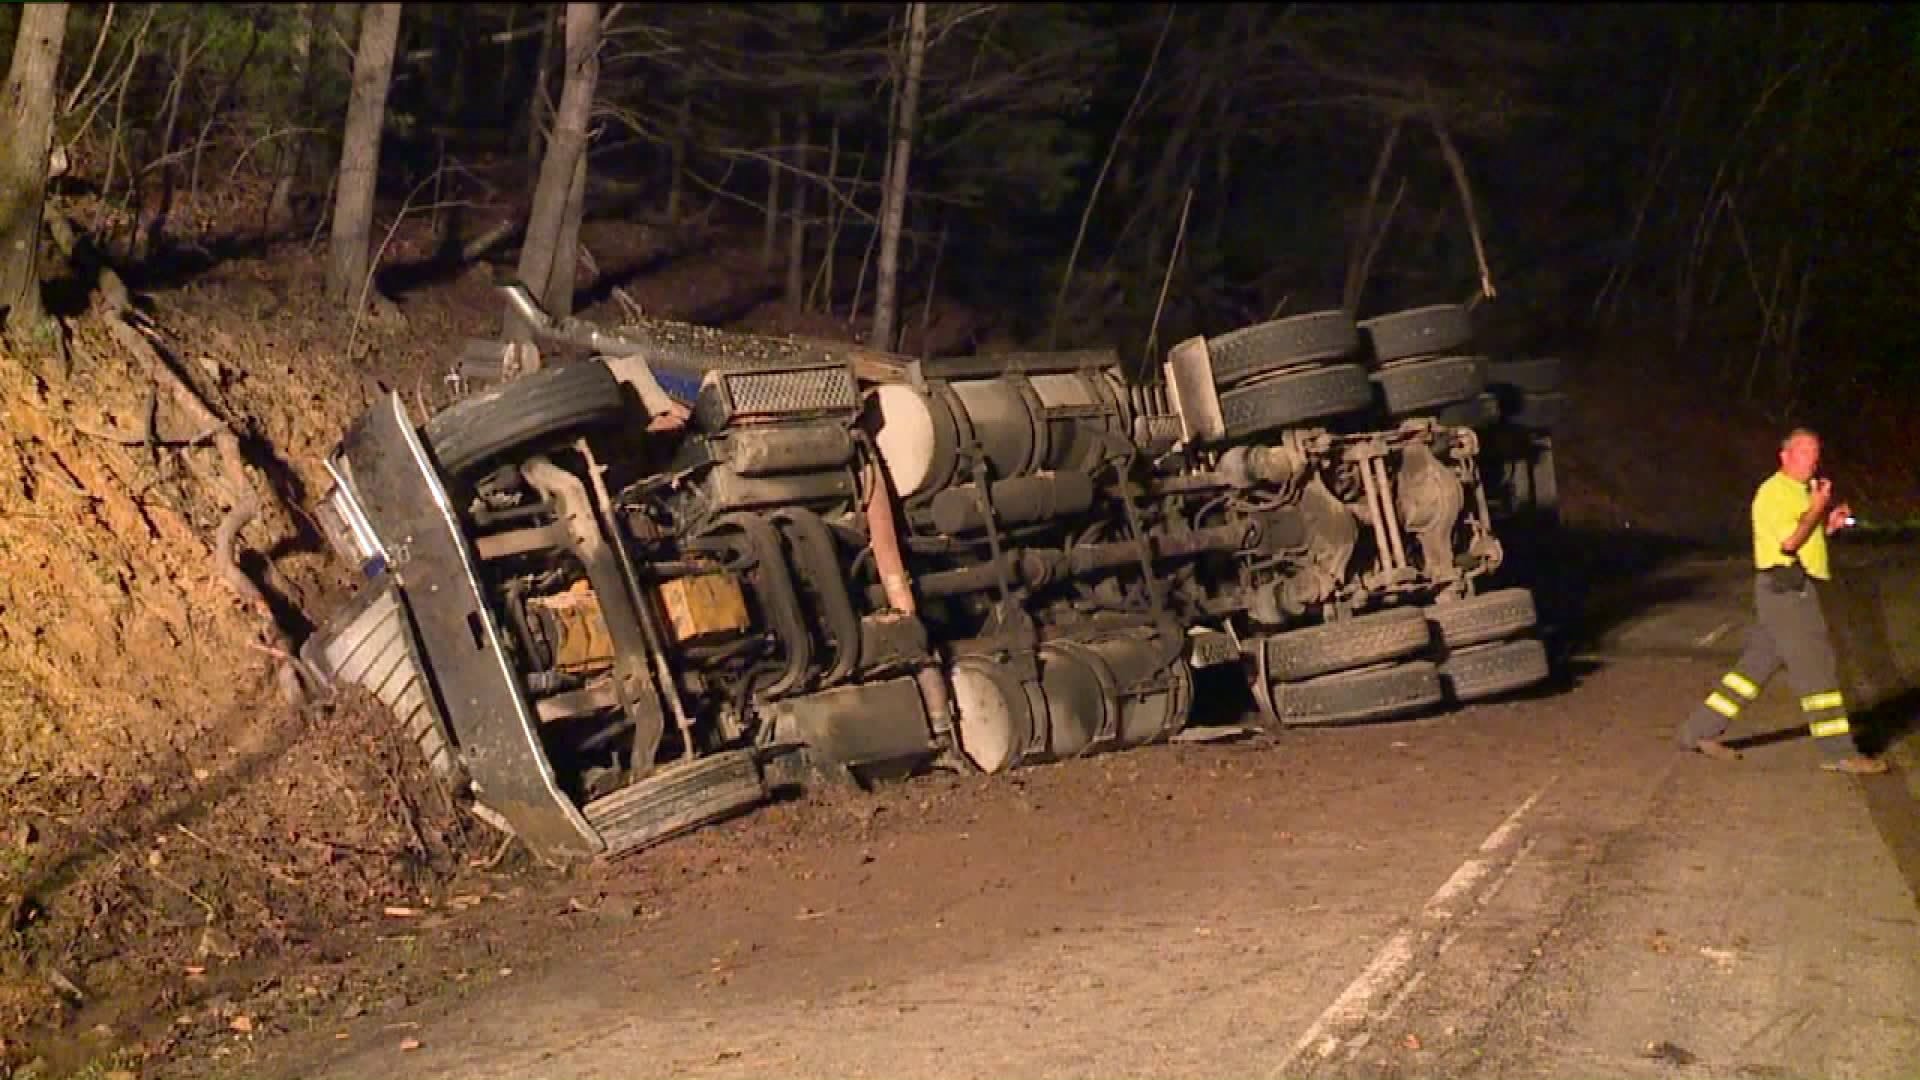 Tractor Trailer Crash Closes Ramp in Luzerne County